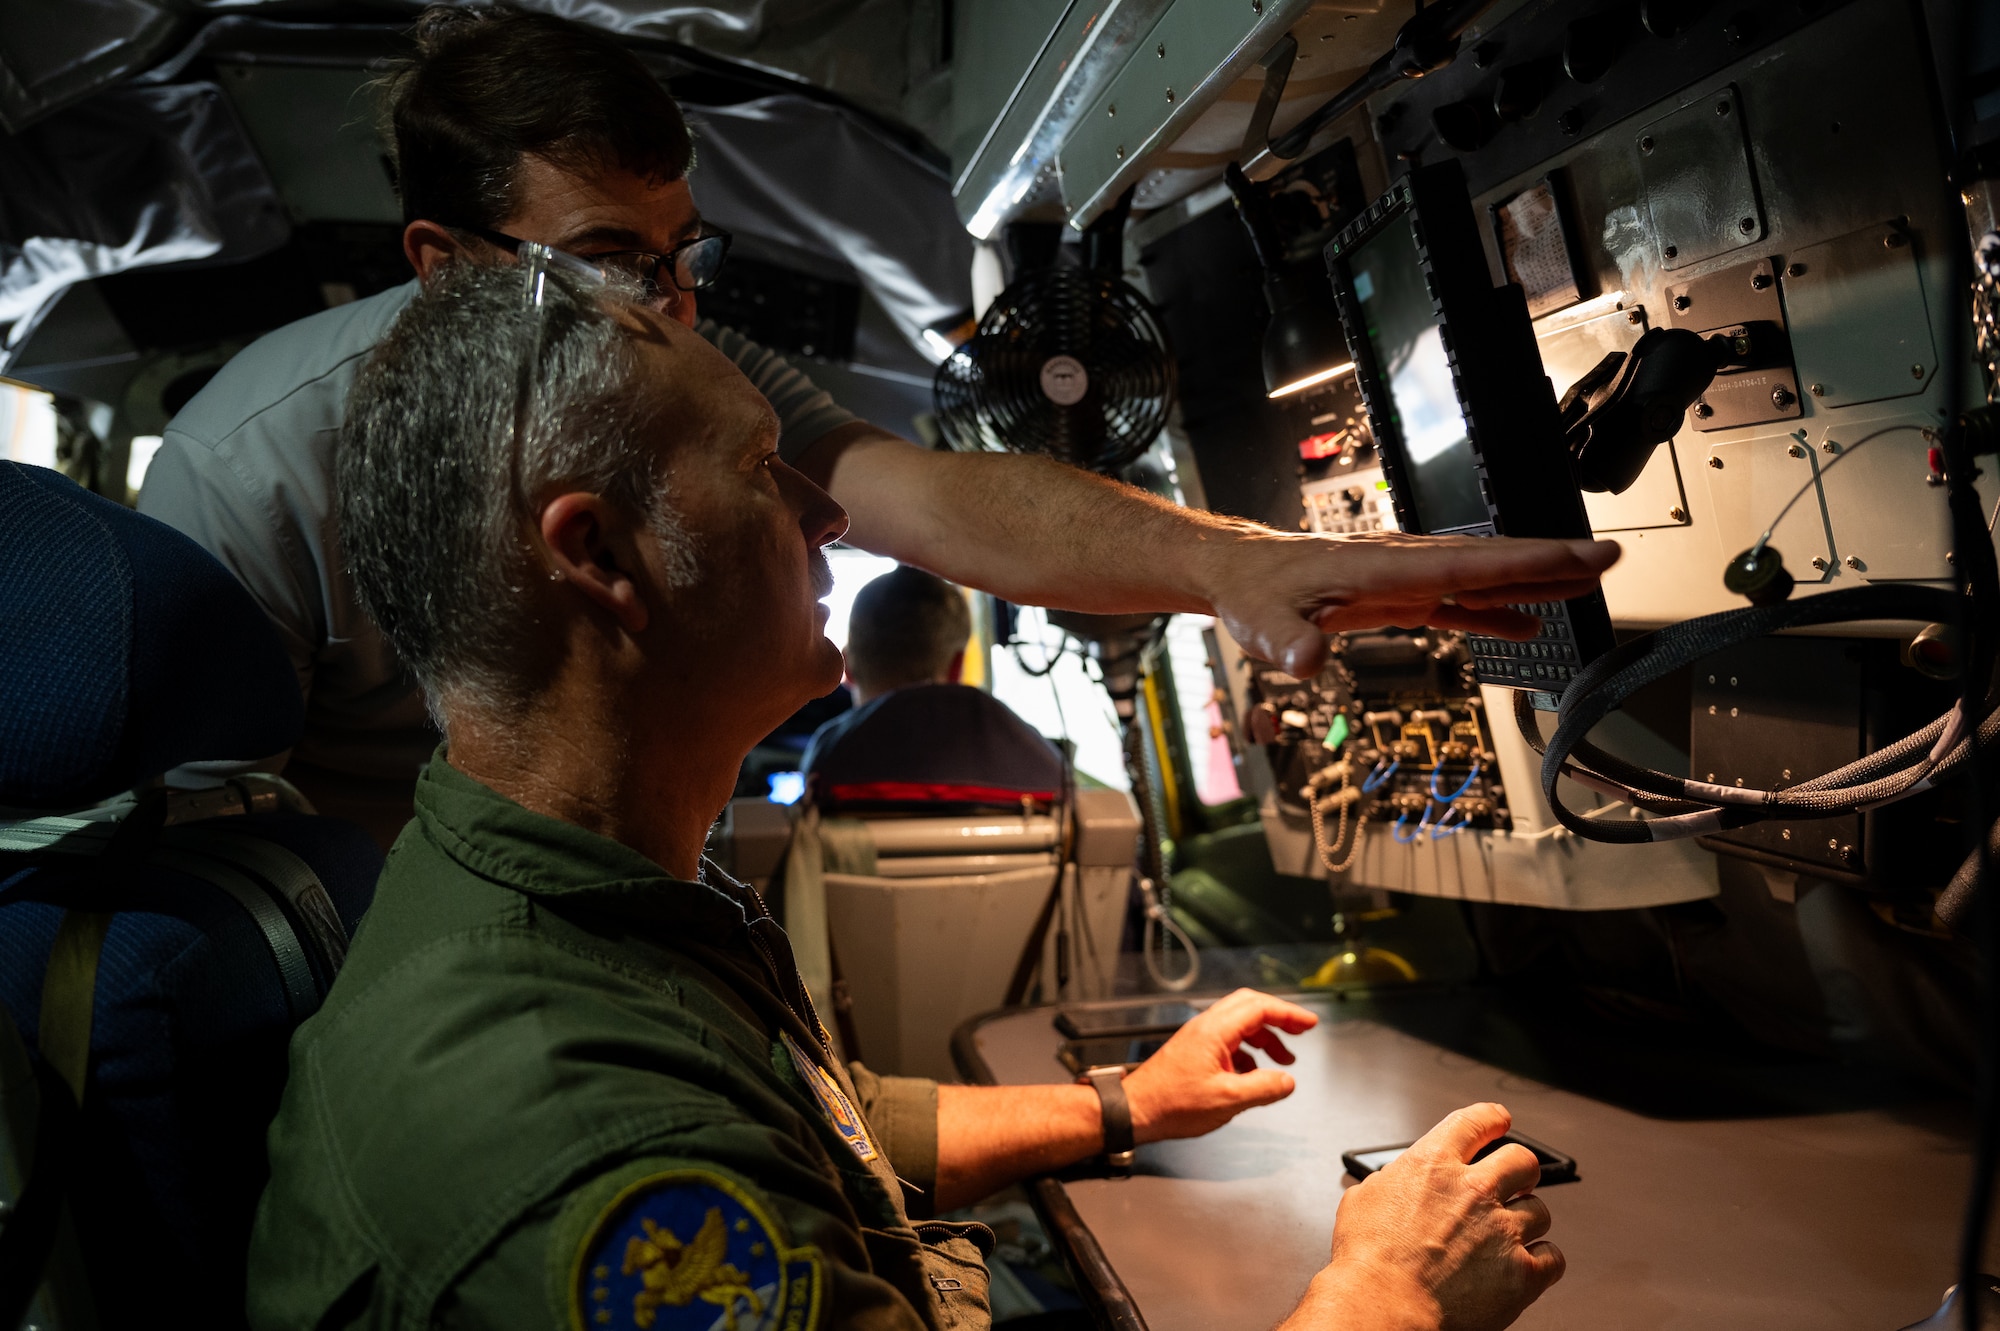 A man in a U.S. Air Force flight uniform sits and looks at a screen that another man, in civilian clothes, is pointing to.